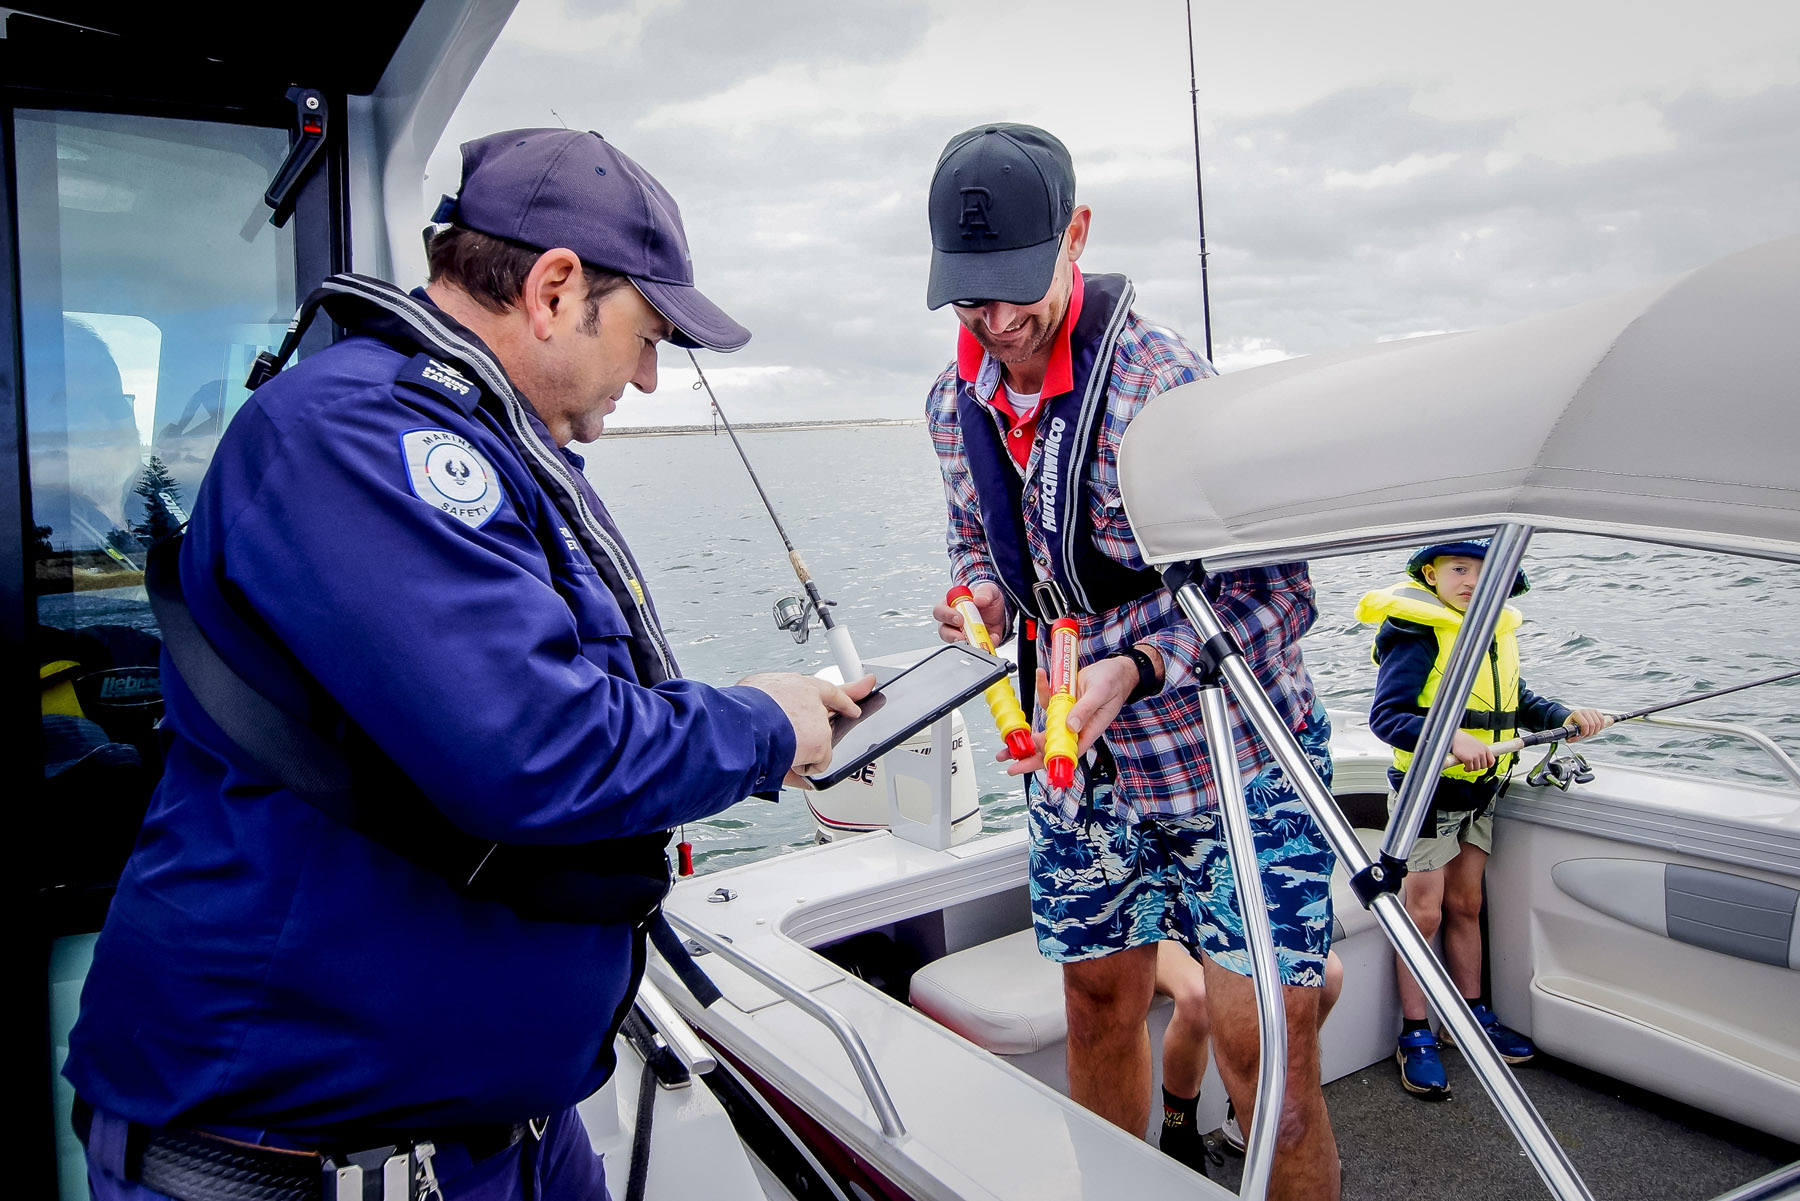 Marine Safety Officer checking the flares of a male on a boat